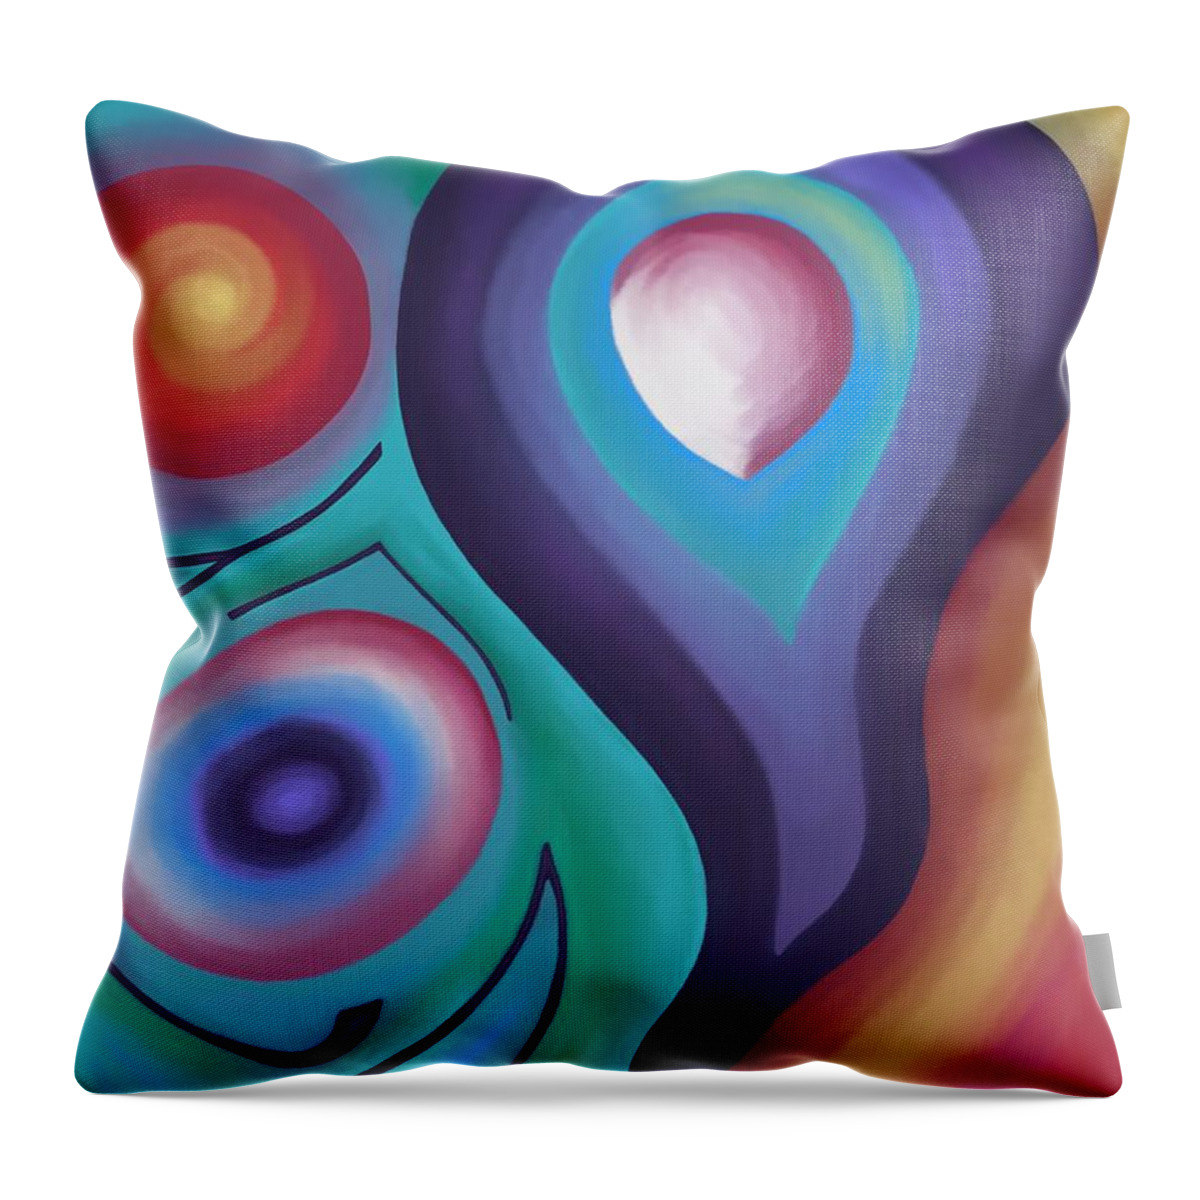 Soft Pastels Throw Pillow featuring the digital art A Mothers Love by Standing Crow